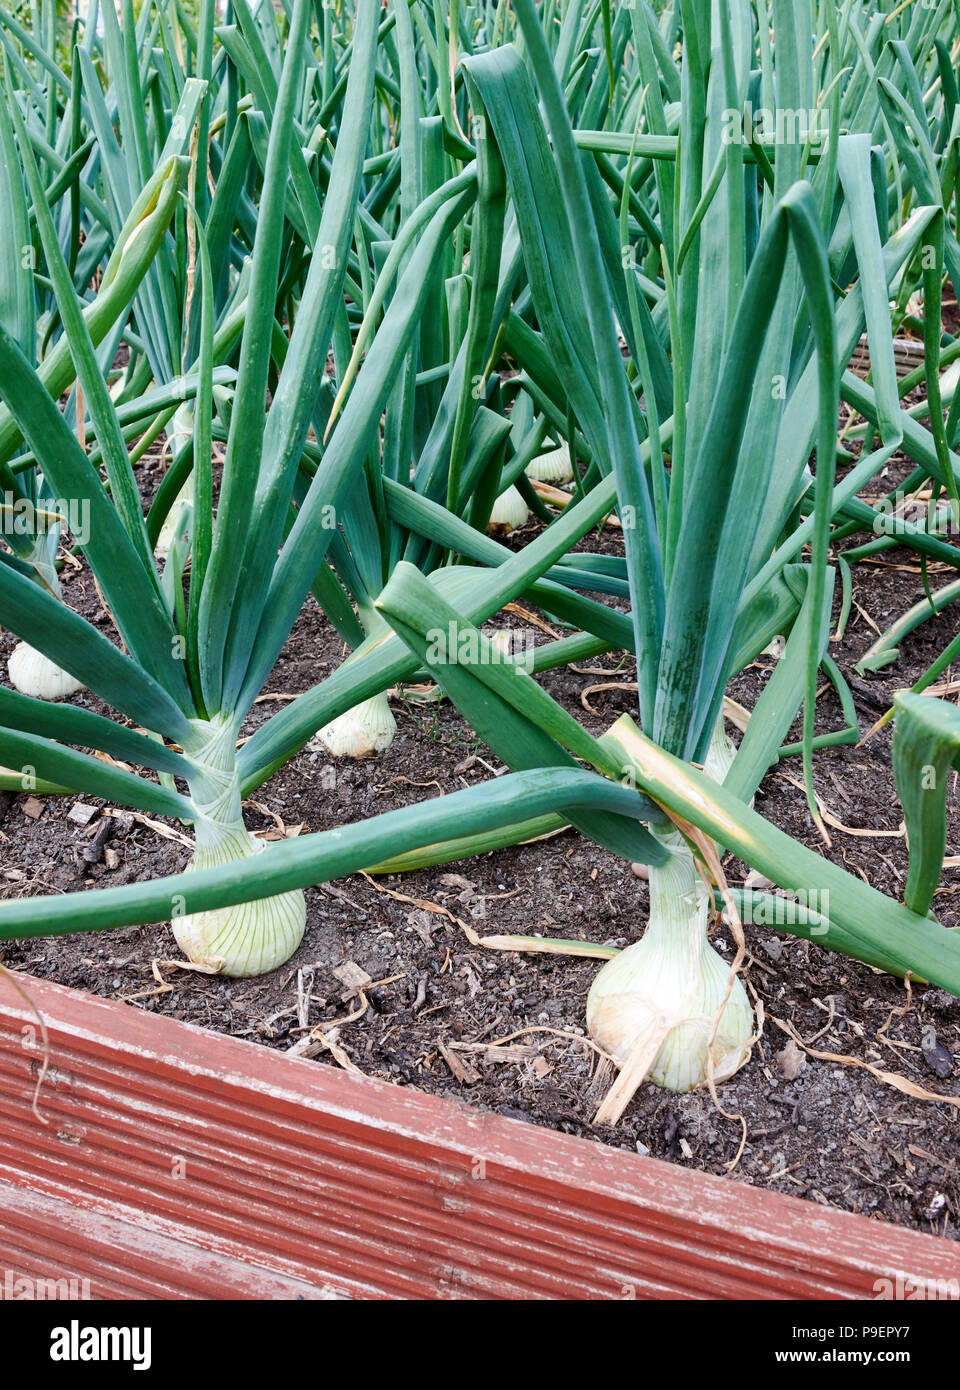 A type of Spanish onion, Ailsa Craig (Allium cepa “Ailsa Craig”) is grown from seed and produces large onions that store and keep well. Stock Photo